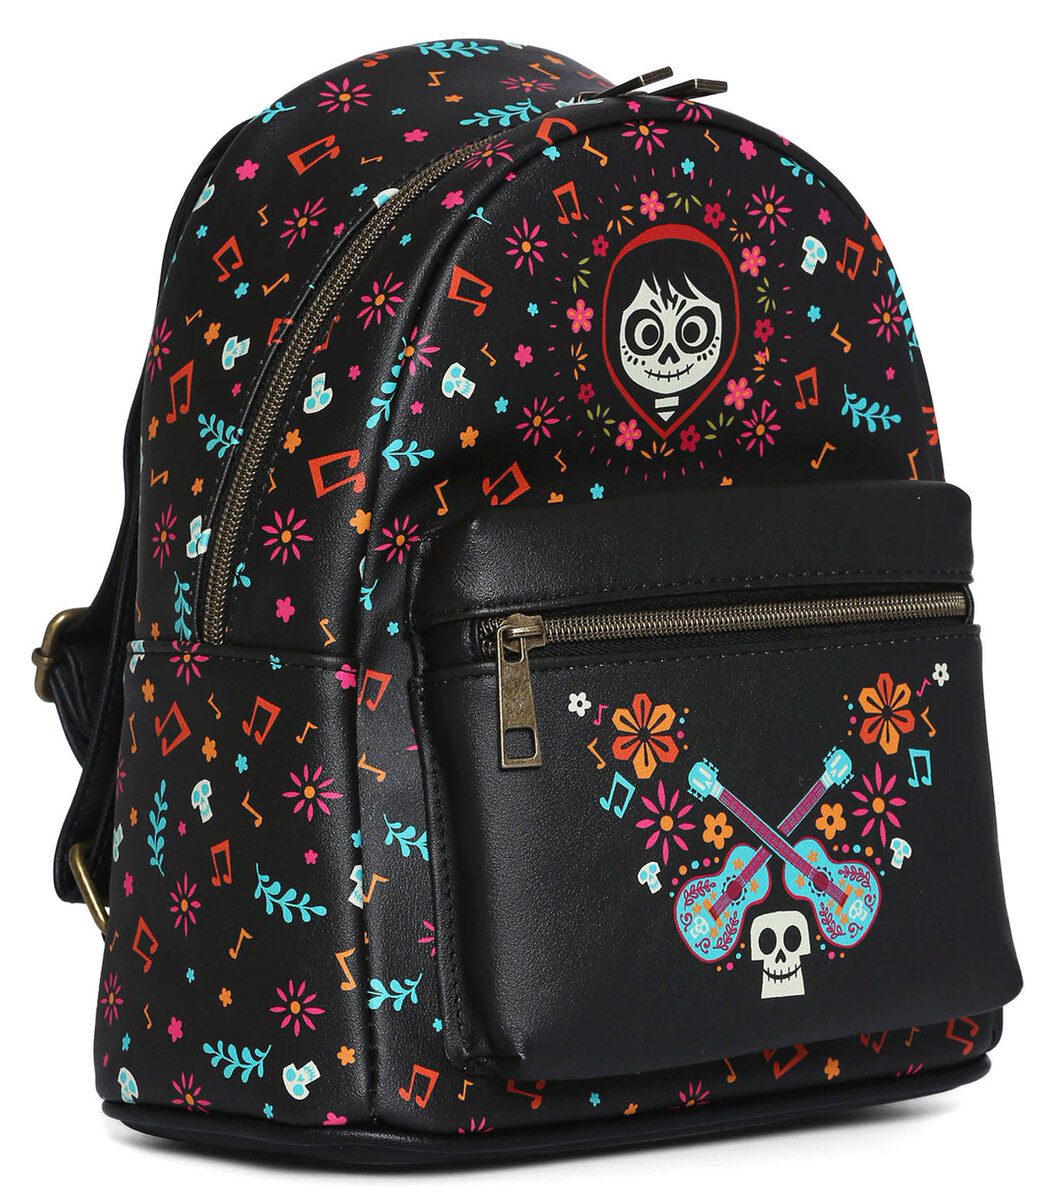 Disney Pixar Coco Miguel Music Mini Backpack by Loungefly - New, With Tags